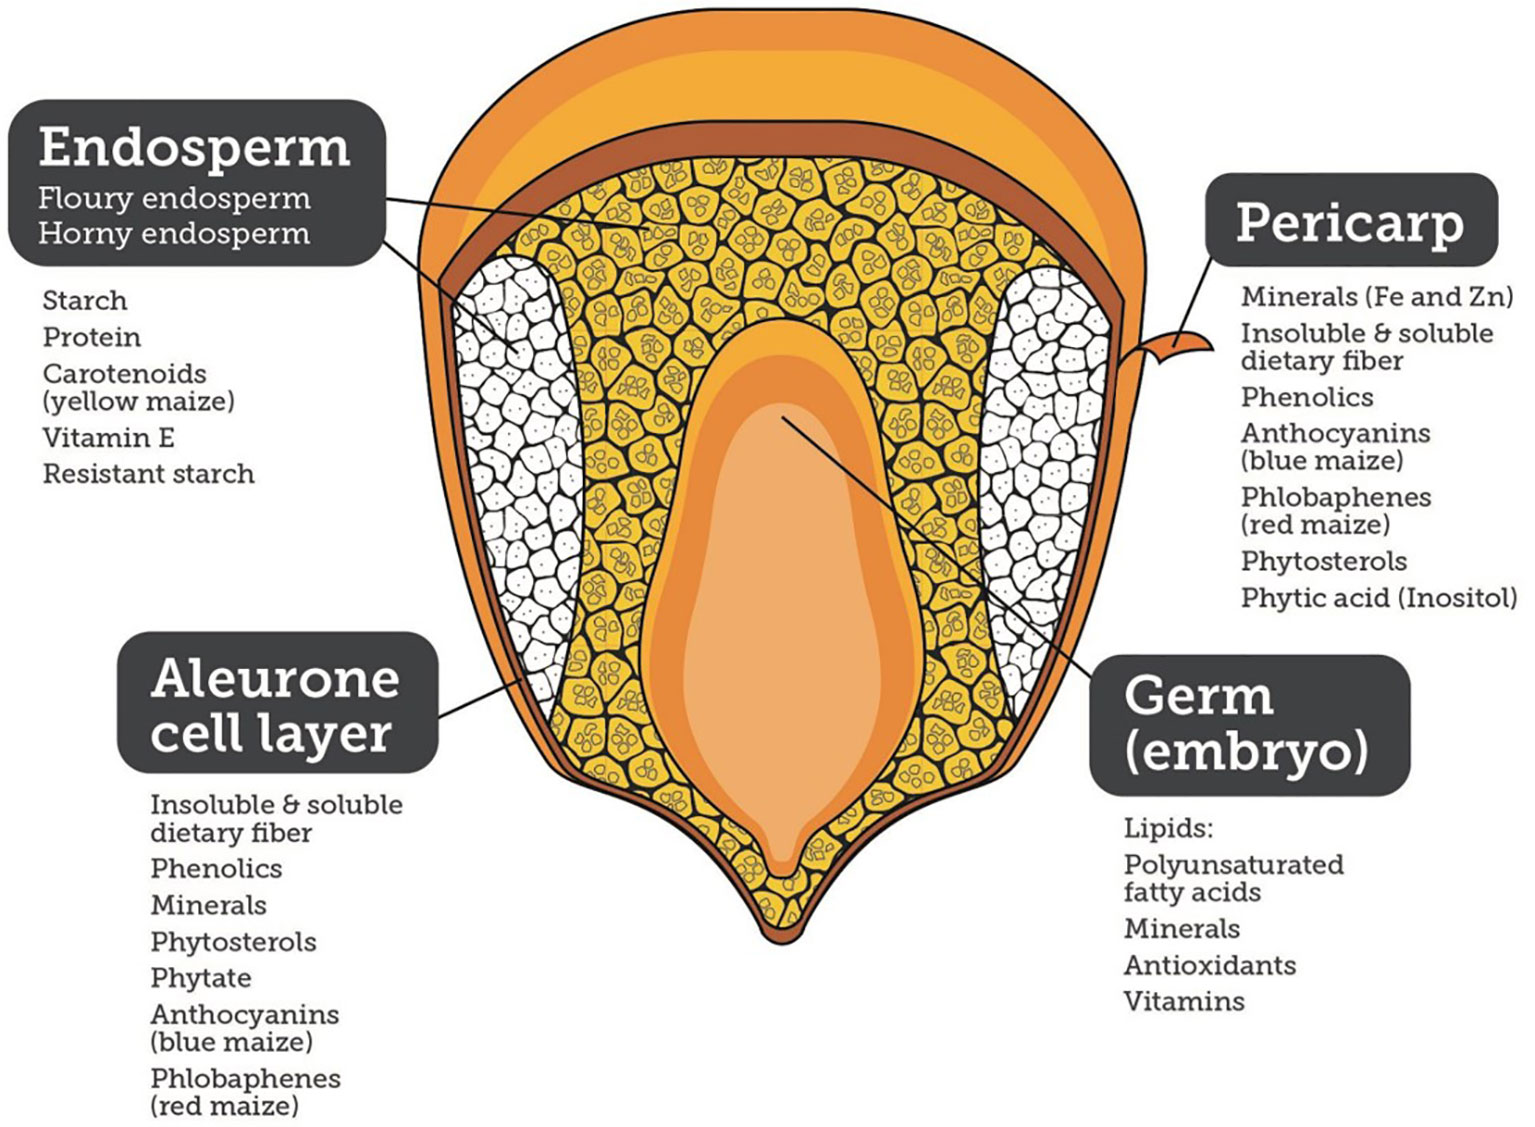 Simple digram of a maize kernel showing the major parts and their nutritional qualities. The parts labeled are endosperm, aleurone cell layer, pericarp, and germ (embryo). Among other things, the endosperm provides starch and protein, the aleurone layer provides fiber, the pericarp provides fiber and minerals, and the germ provides lipids. The endosperm includes both floury and horny or vitreous endosperm.